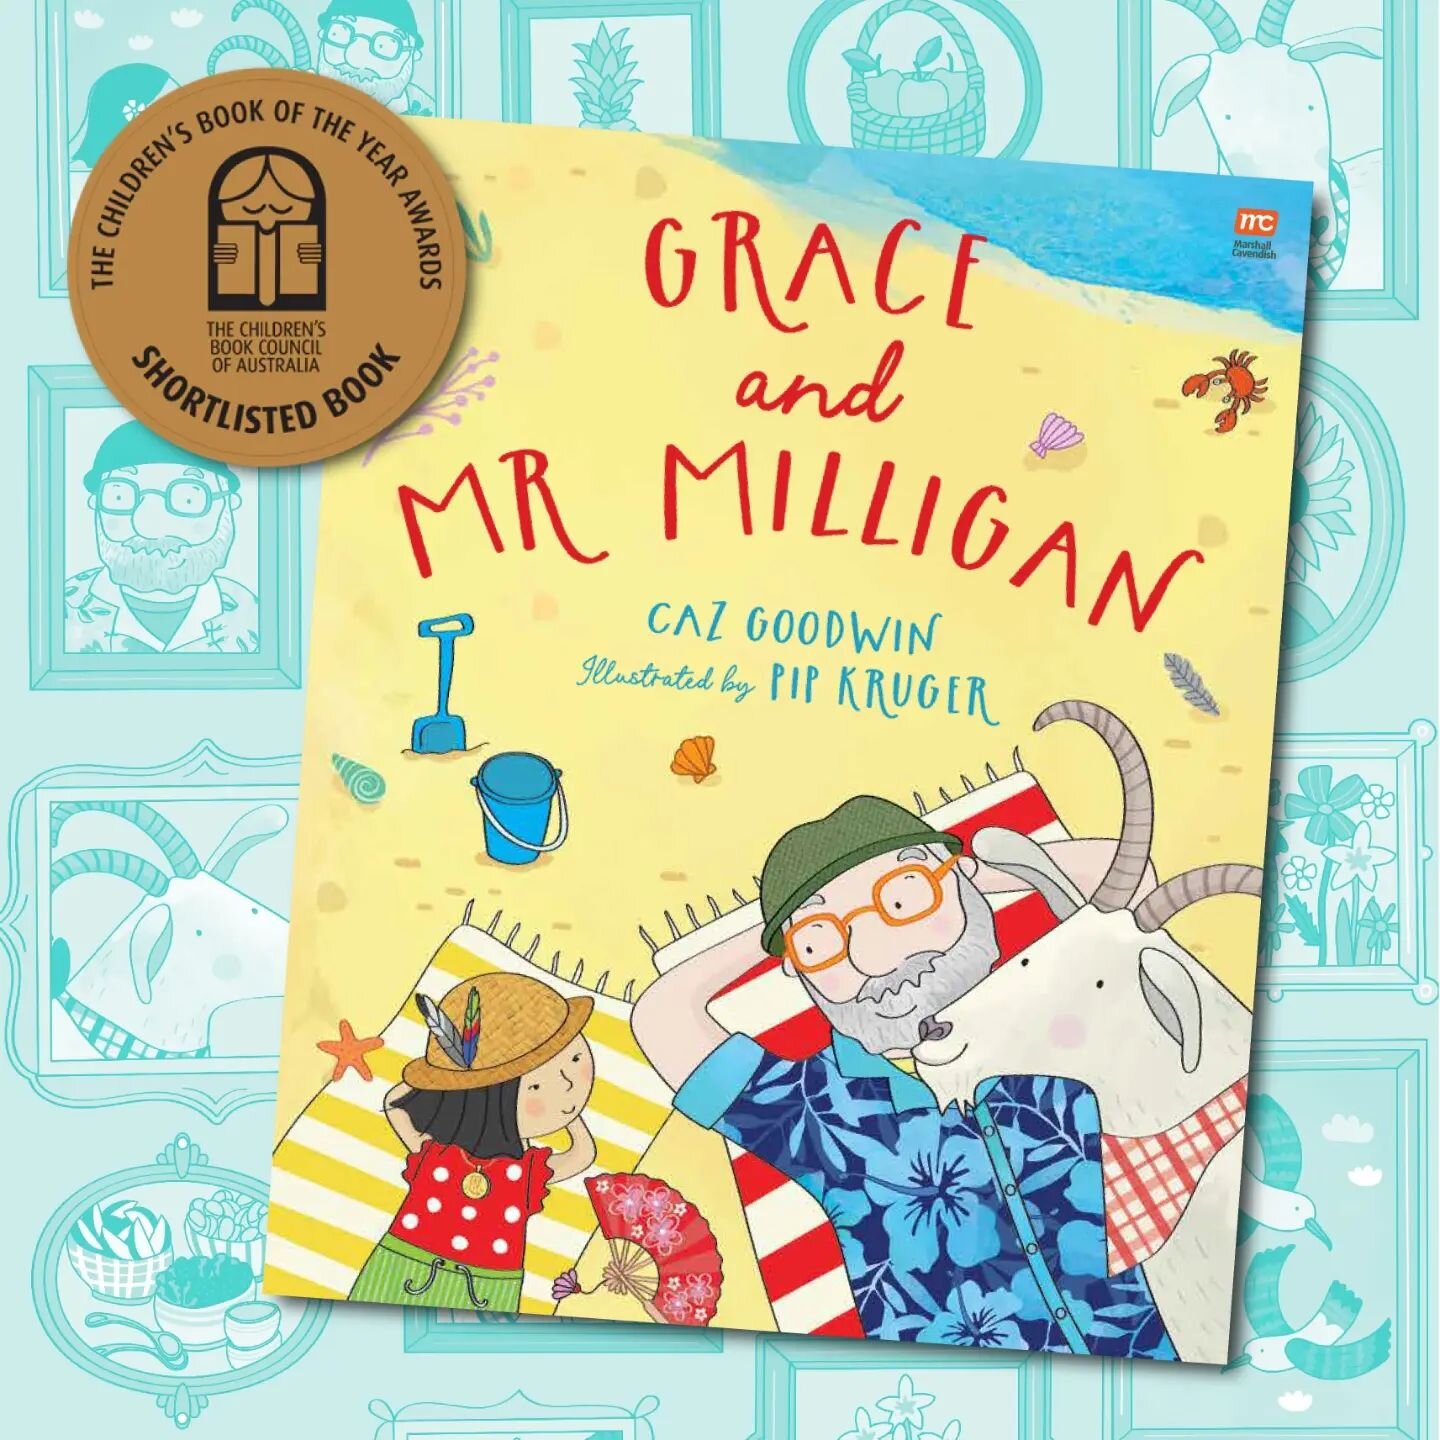 Over the moon to share that Grace &amp; Mr Milligan has been shortlisted in not 1 but 2 categories by @cbcaustralia this year! 'Book of the year: Early Childhood' AND 'Book of the year: New Illustrator'. ✨🐞🌸🌞🥂
I still remember first reading the m